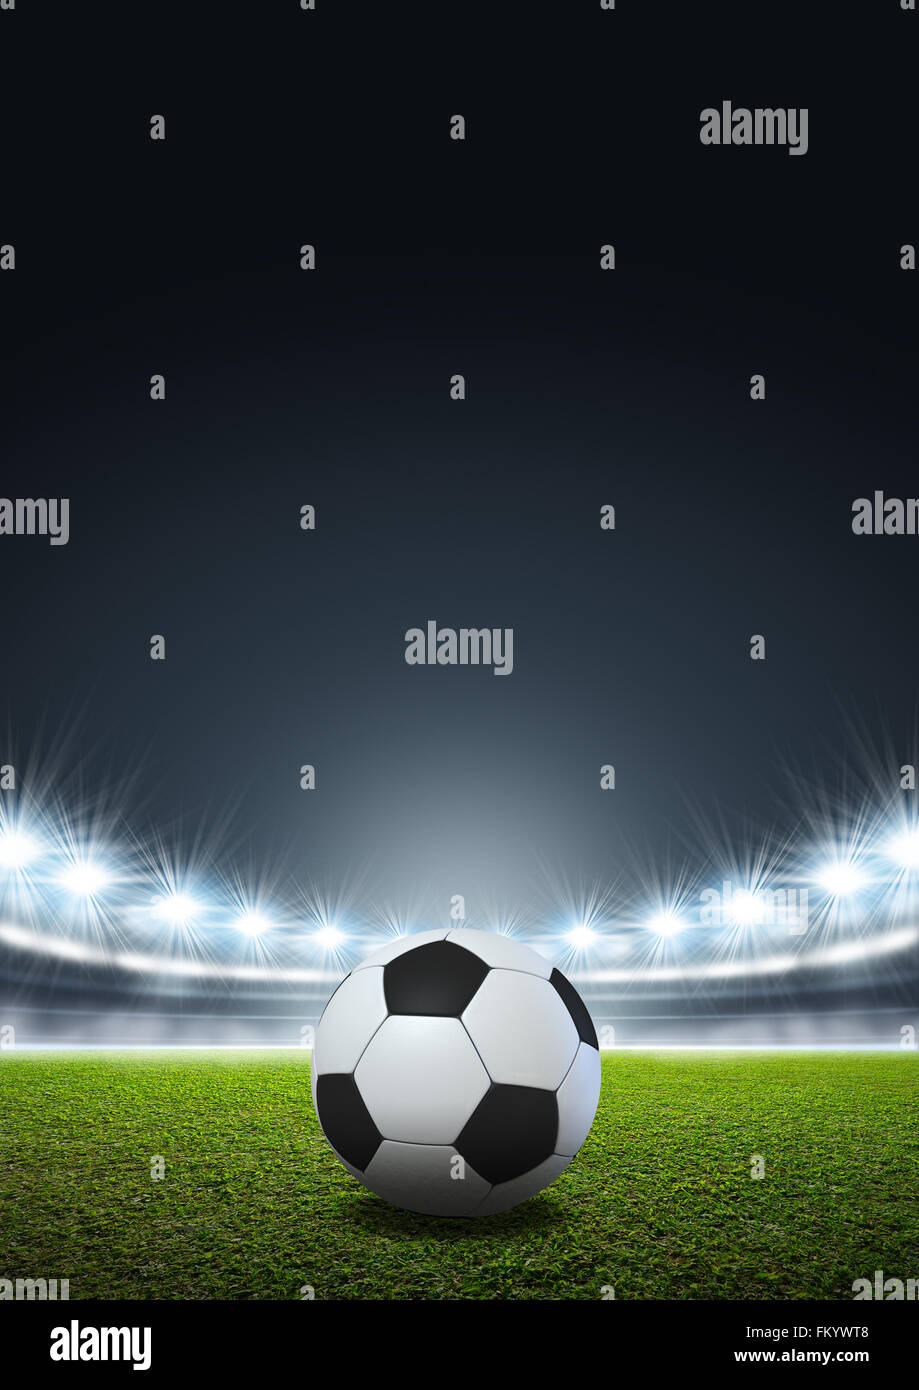 A generic stadium with an unmarked green grass pitch at night under illuminated floodlights and a regular soccer ball Stock Photo